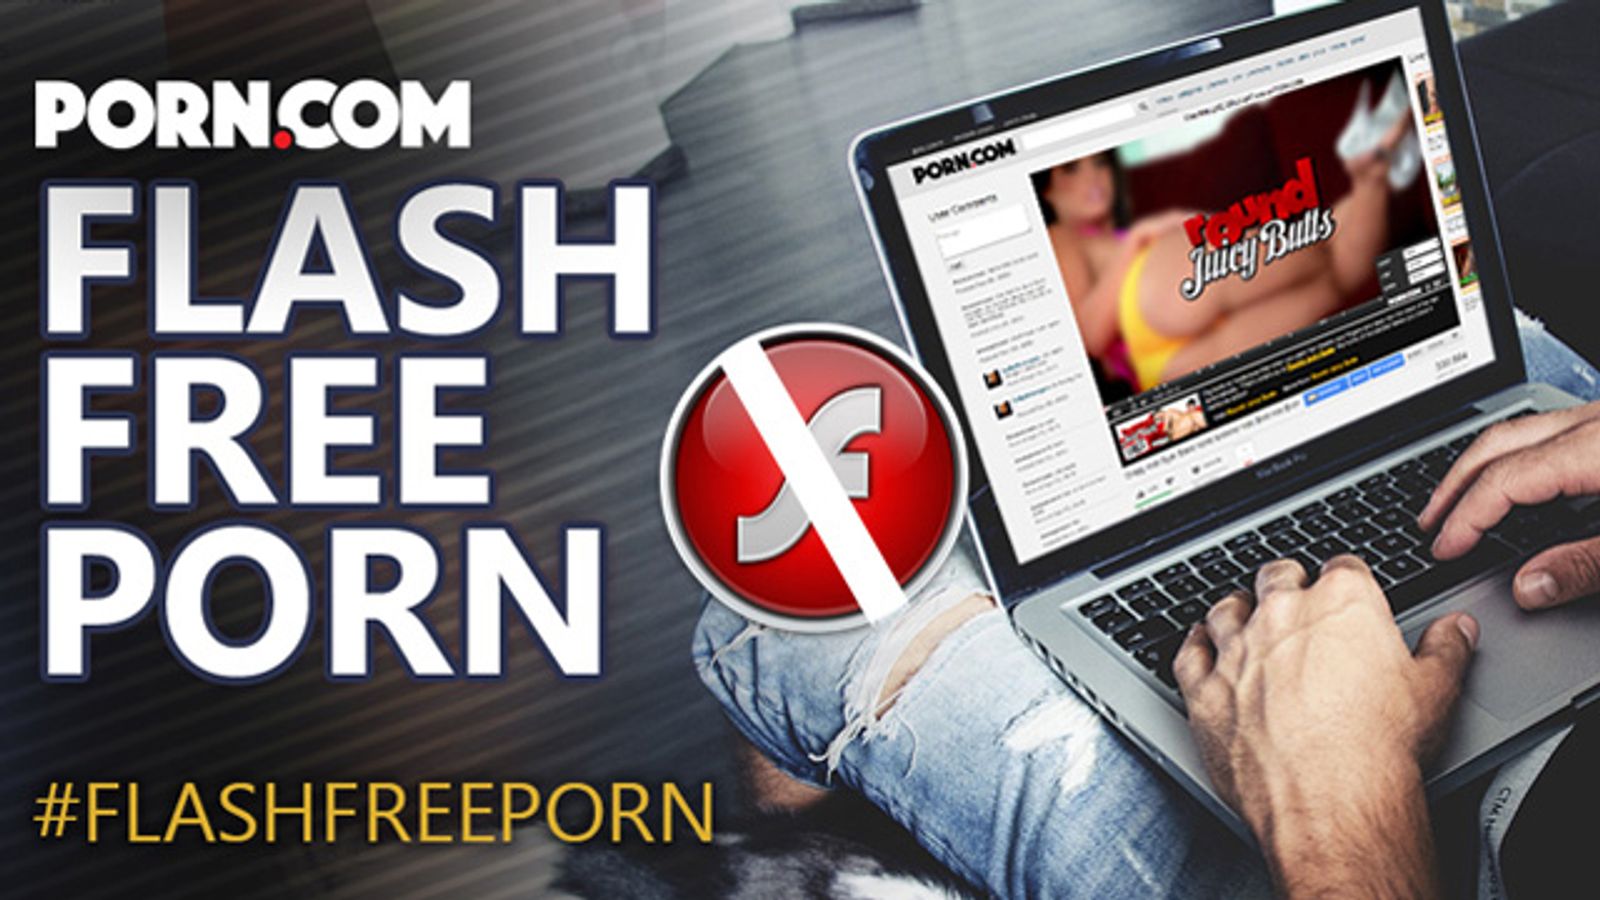 Porn.com Hopes Its HTML5 Player Will Set Industry Safety Standard